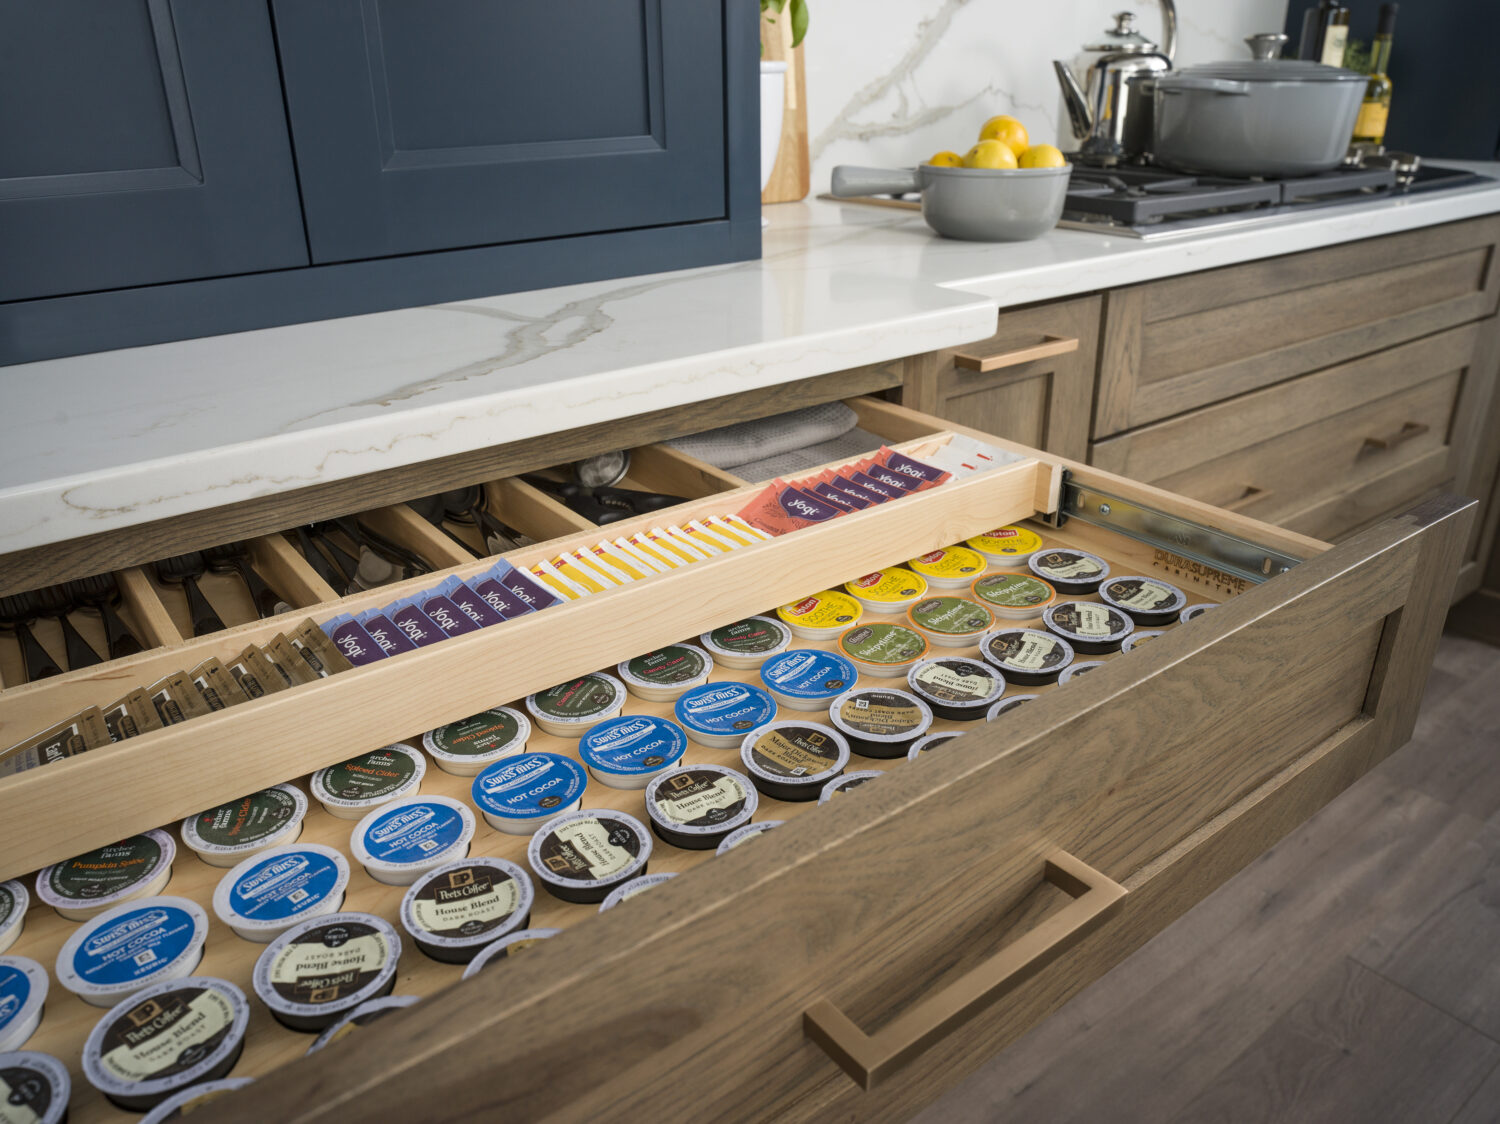 A kitchen drawer opens to show two layers of tiered storage. The top tier has a utensil organizer and storage for tea bags, the bottom is a full drawer K-cup organizer.